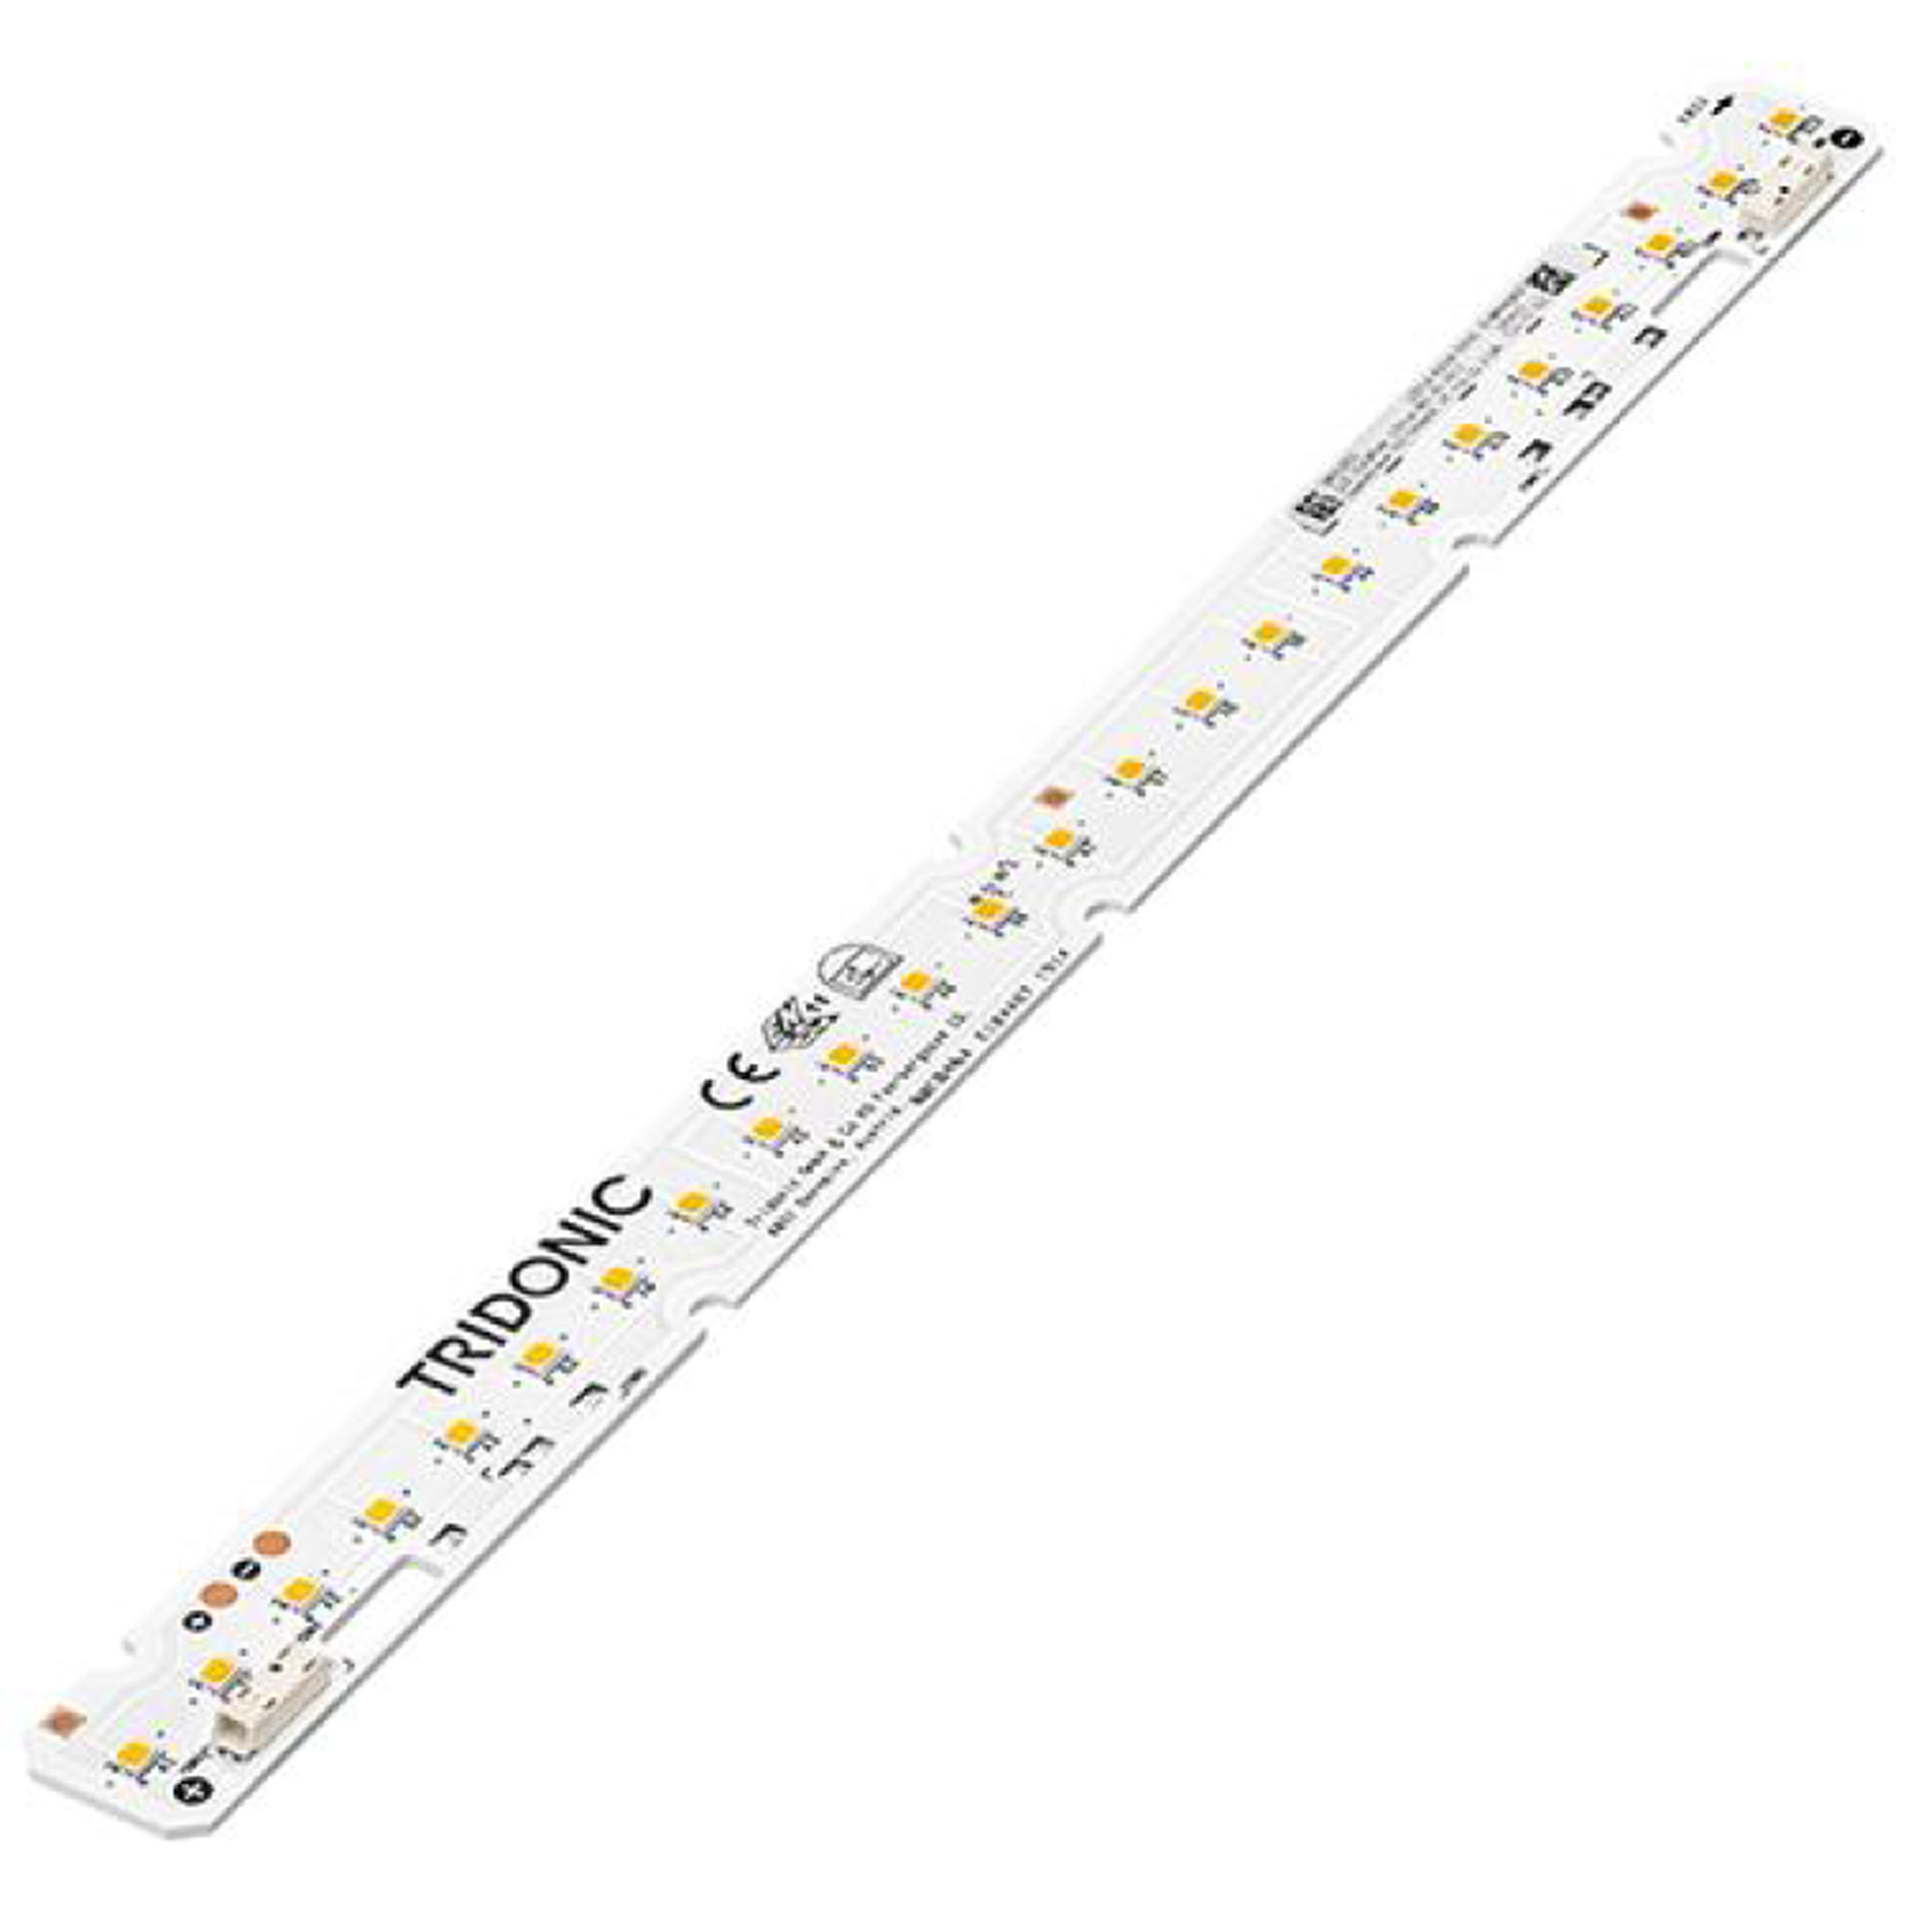 LLE Components Tridonic LED Boards